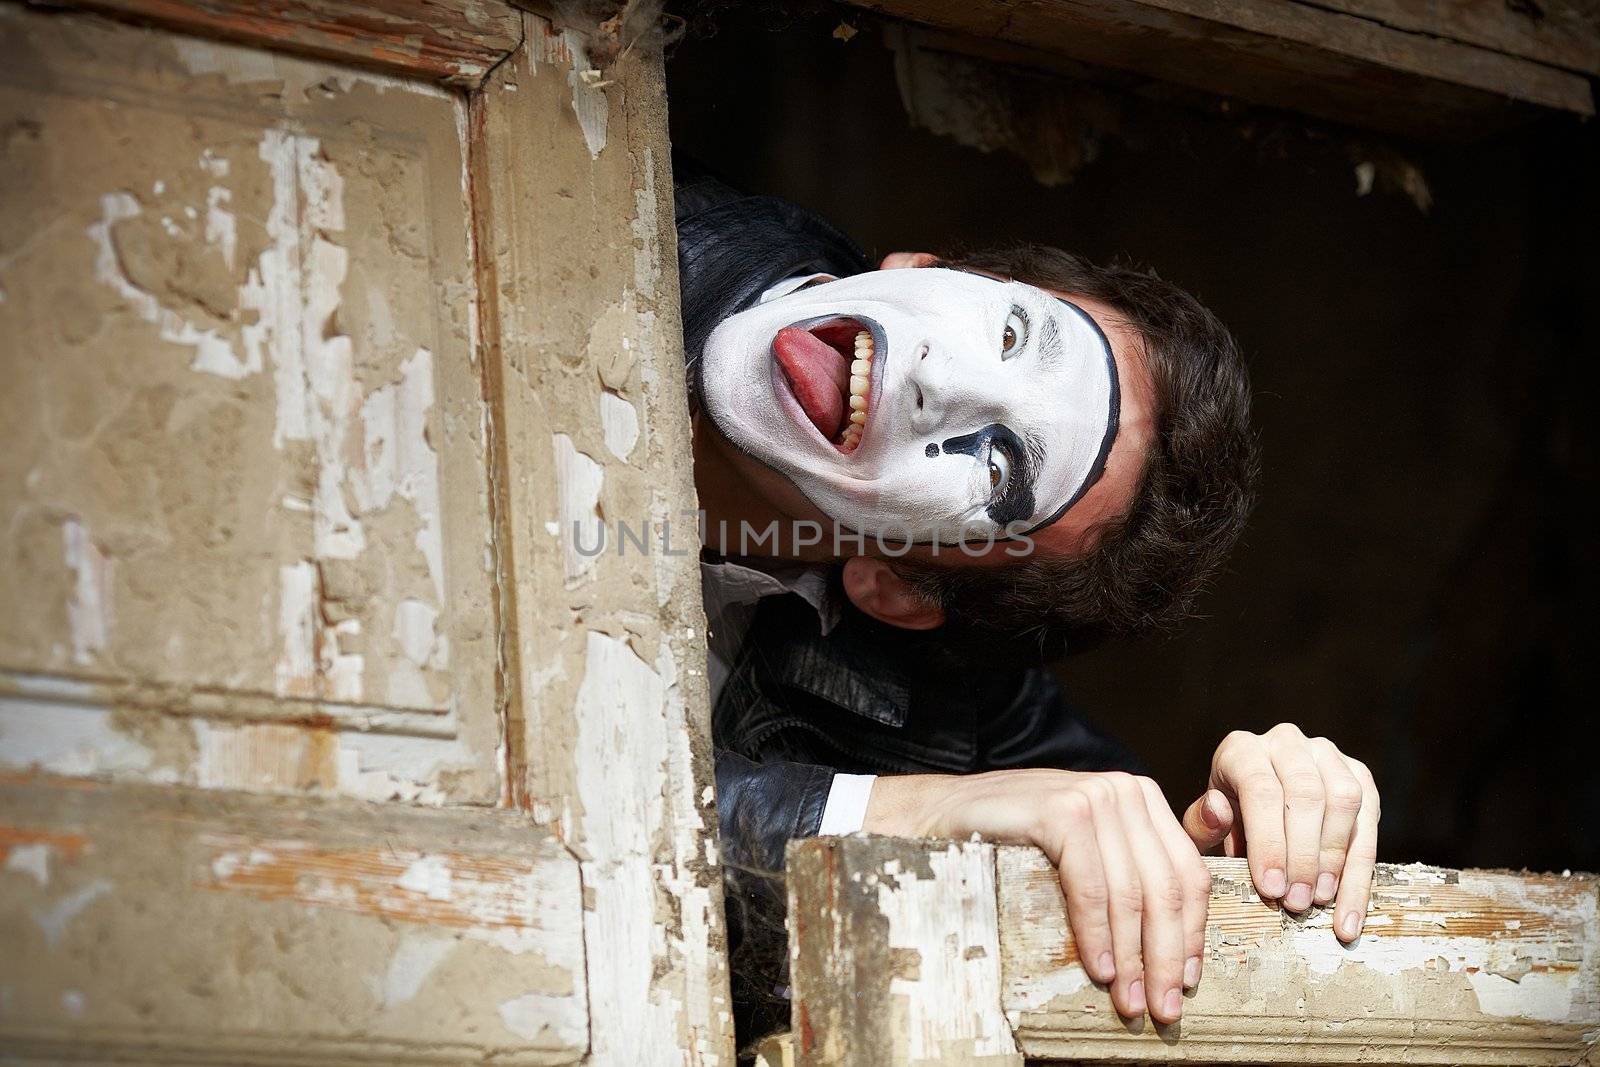 Portrait of a Man ​​mime. Grimacing near the old wooden door with peeling paint. Cocked his head